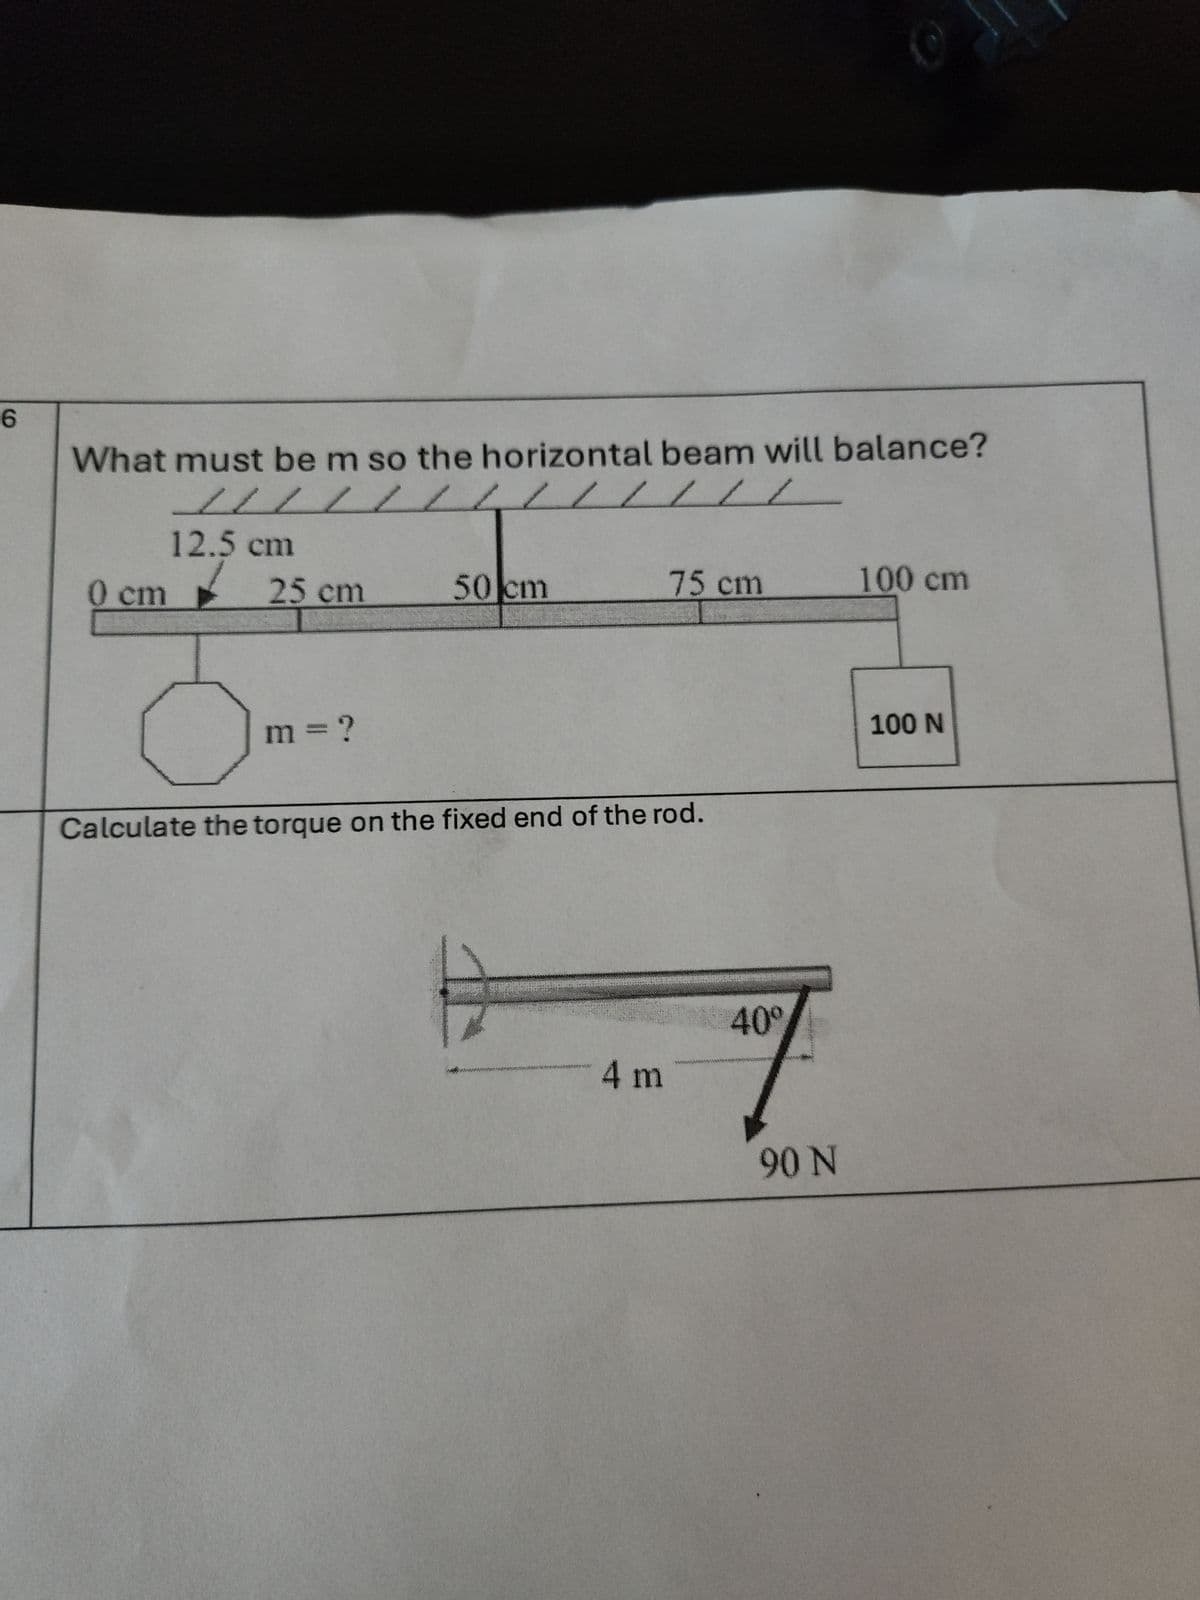 6
What must be m so the horizontal beam will balance?
LLL
12.5 cm
0 cm
25 cm
50 cm
75 cm
100 cm
m = ?
Calculate the torque on the fixed end of the rod.
4 m
40°
7
90 N
100 N